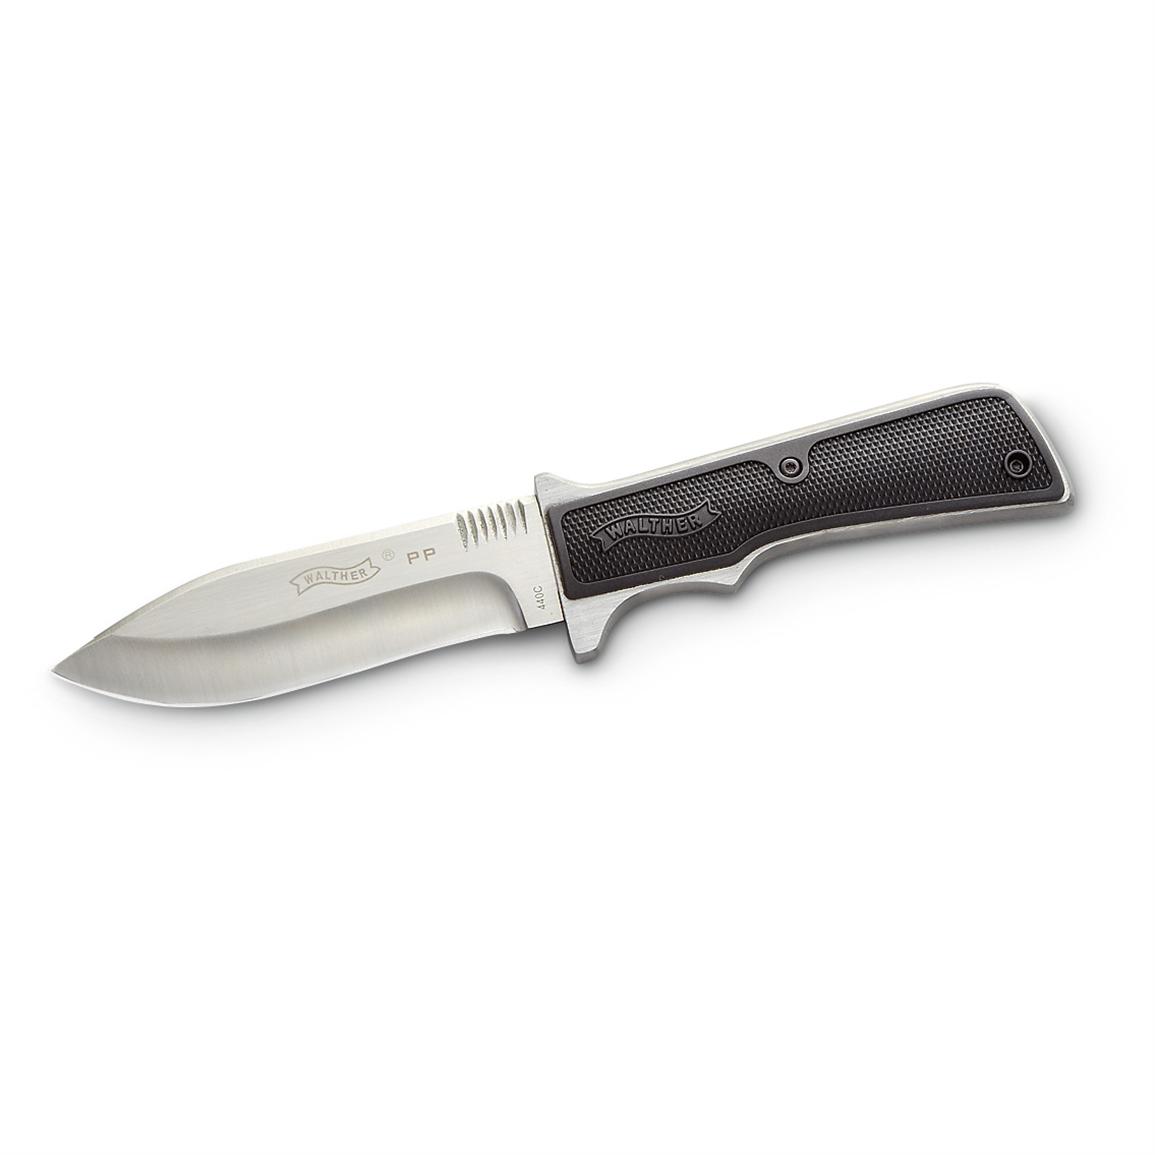 Walther PP Commemorative Hunting Knife - Tactical Knives at Sportsman's Guide